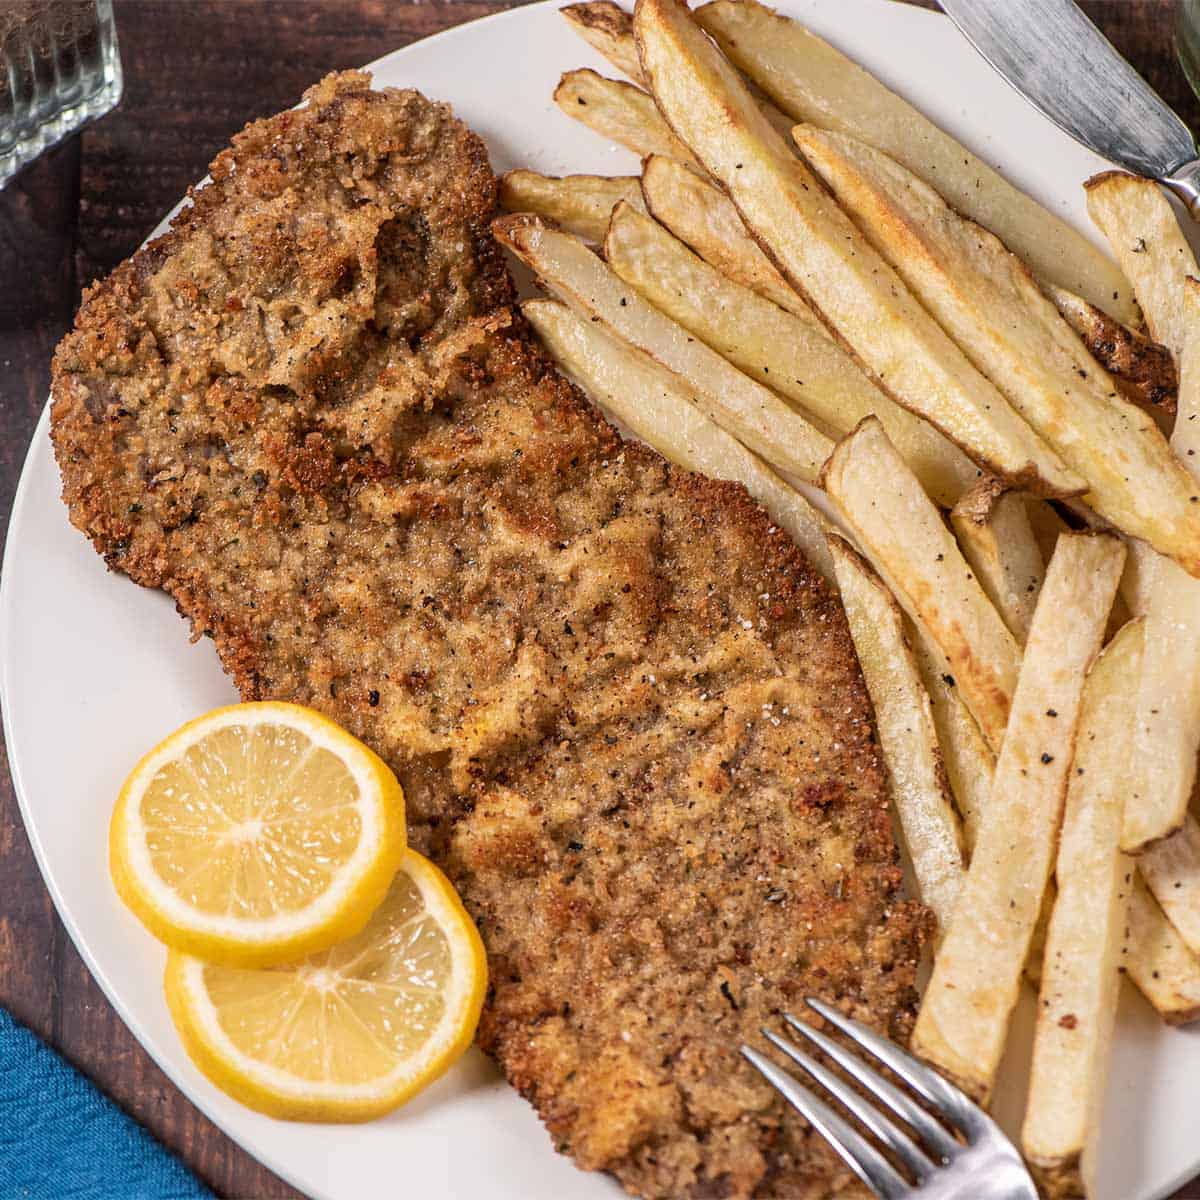 steak milanesa on a plate with lemon slices and fries